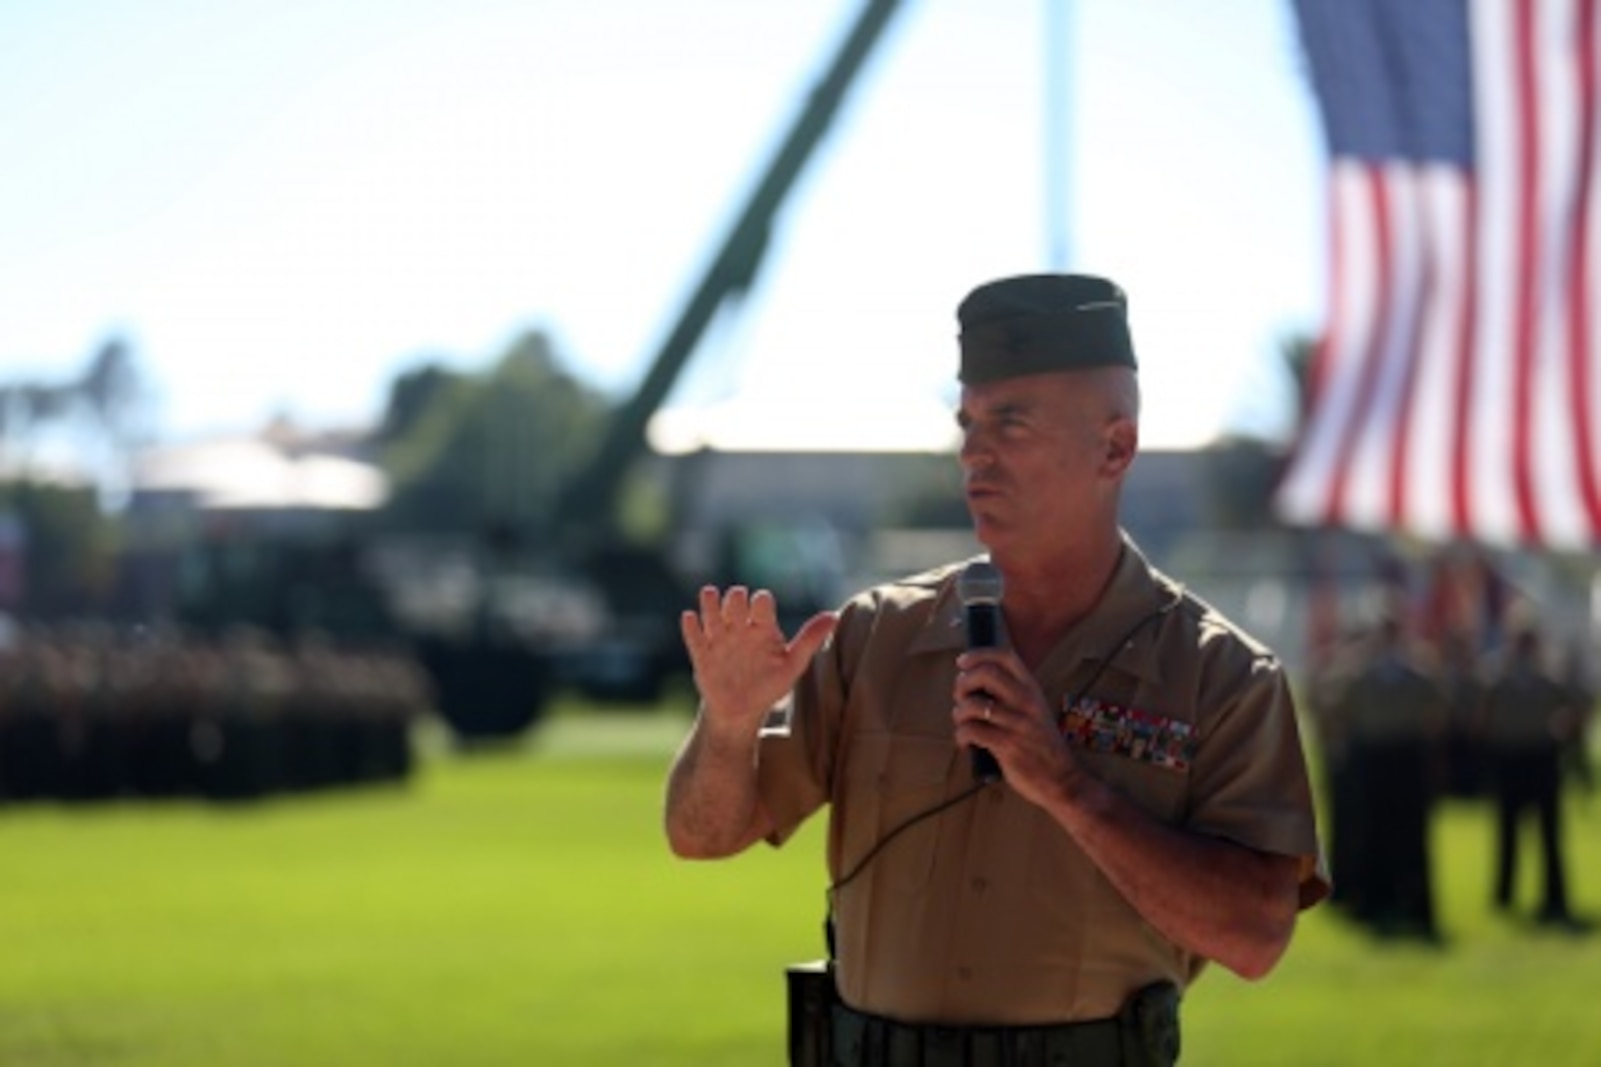 U.S. Marine Brig. Gen. David A Ottignon 1st Marine Logistics Group (1st MLG) speaks to Marines, Sailors, family, and friends who attended during the 1st Marine Logistics Group Change of Command Ceremony aboard Camp Pendleton, Calif., July 24, 2015. The Change of Command for 1st MLG showcased the passing of command from Maj. Gen. Vincent A. Coglinese to Brig. Gen. David a Ottignon. (U.S. Marine Corps photo by Lance Cpl. Lauren Falk/Released)